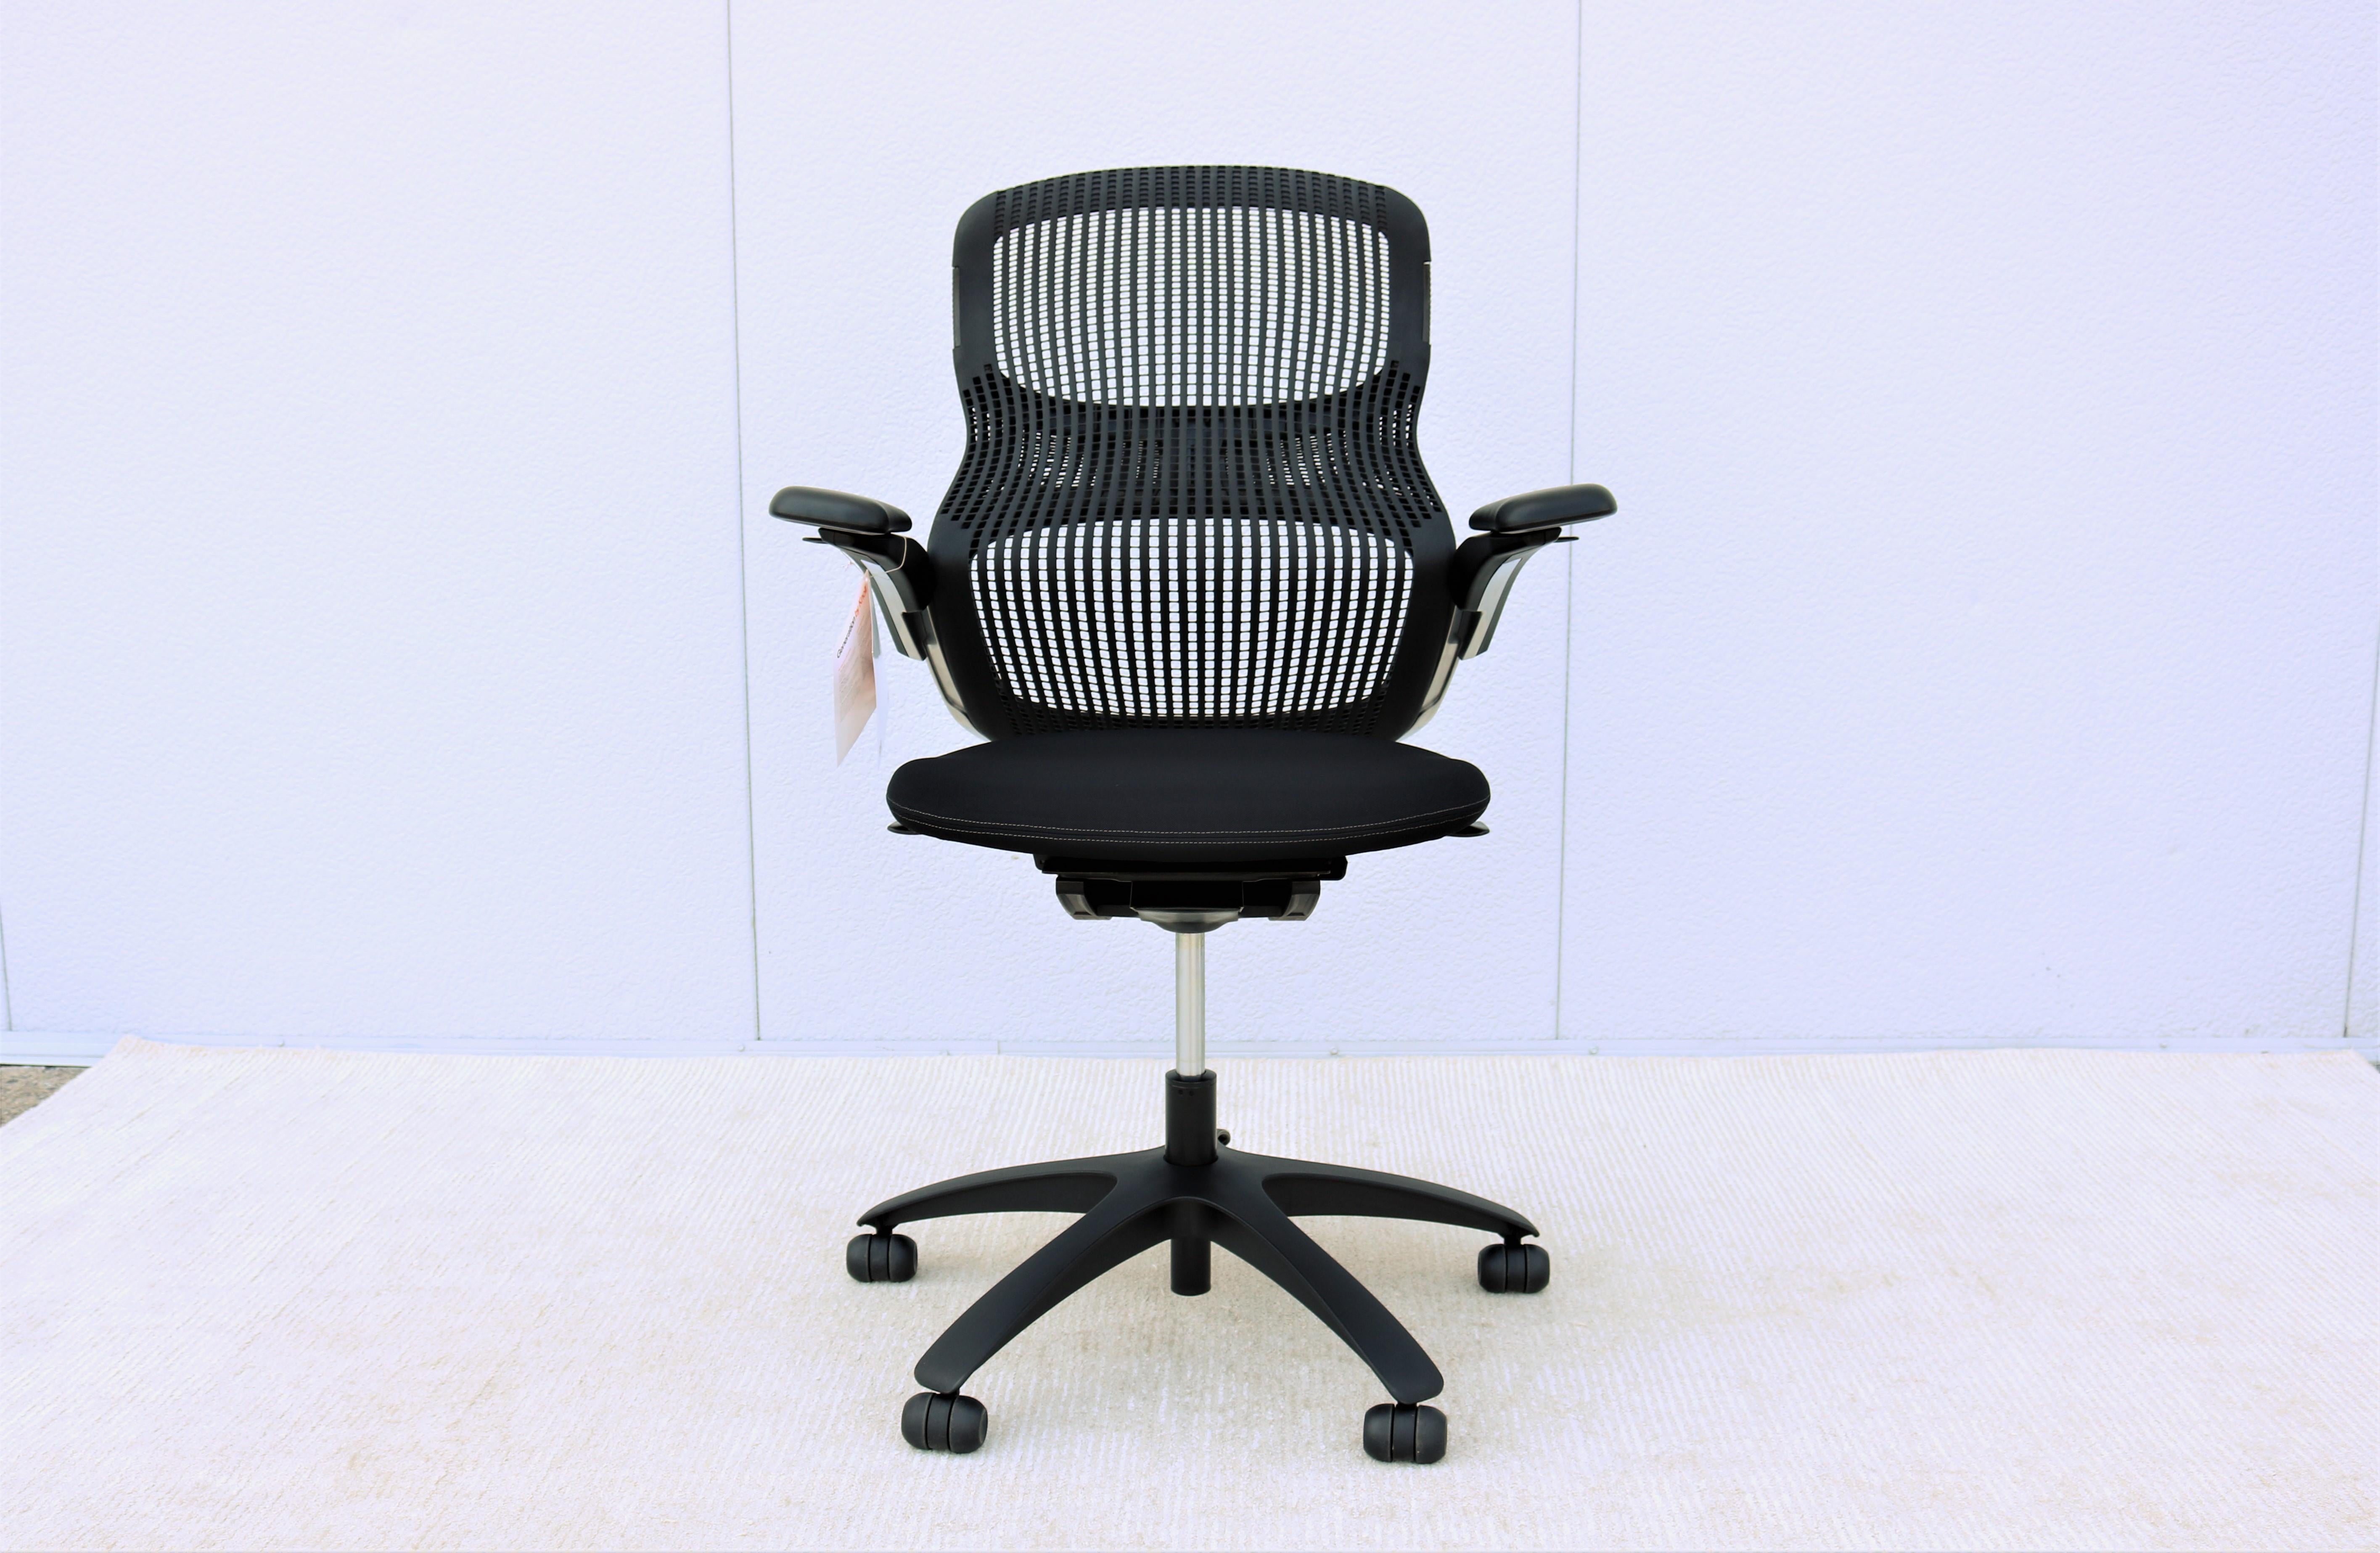 Contemporary Knoll Generation Black Ergonomic Office Desk Chair Fully Adjustable, Brand New For Sale